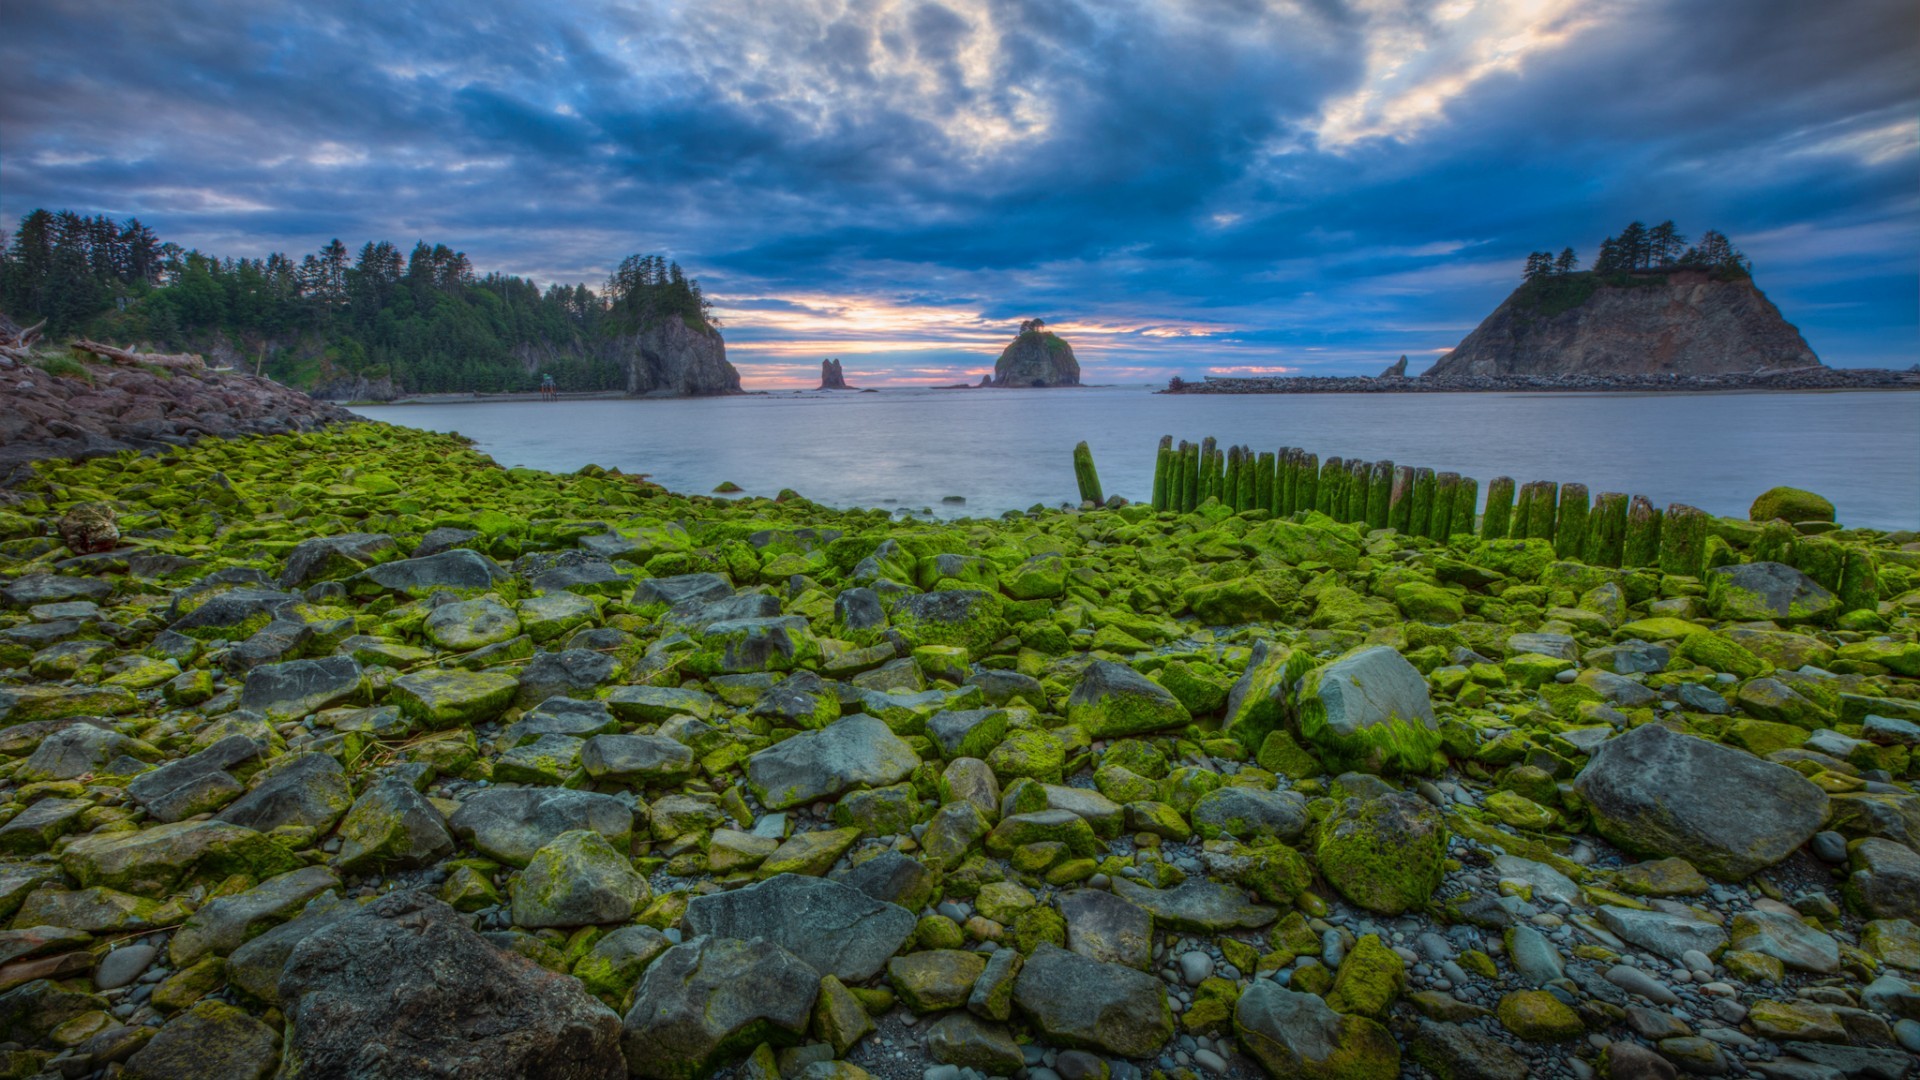 General 1920x1080 nature landscape water trees clouds USA rocks stones moss forest sea sunset morning Olympic National Park Washington State